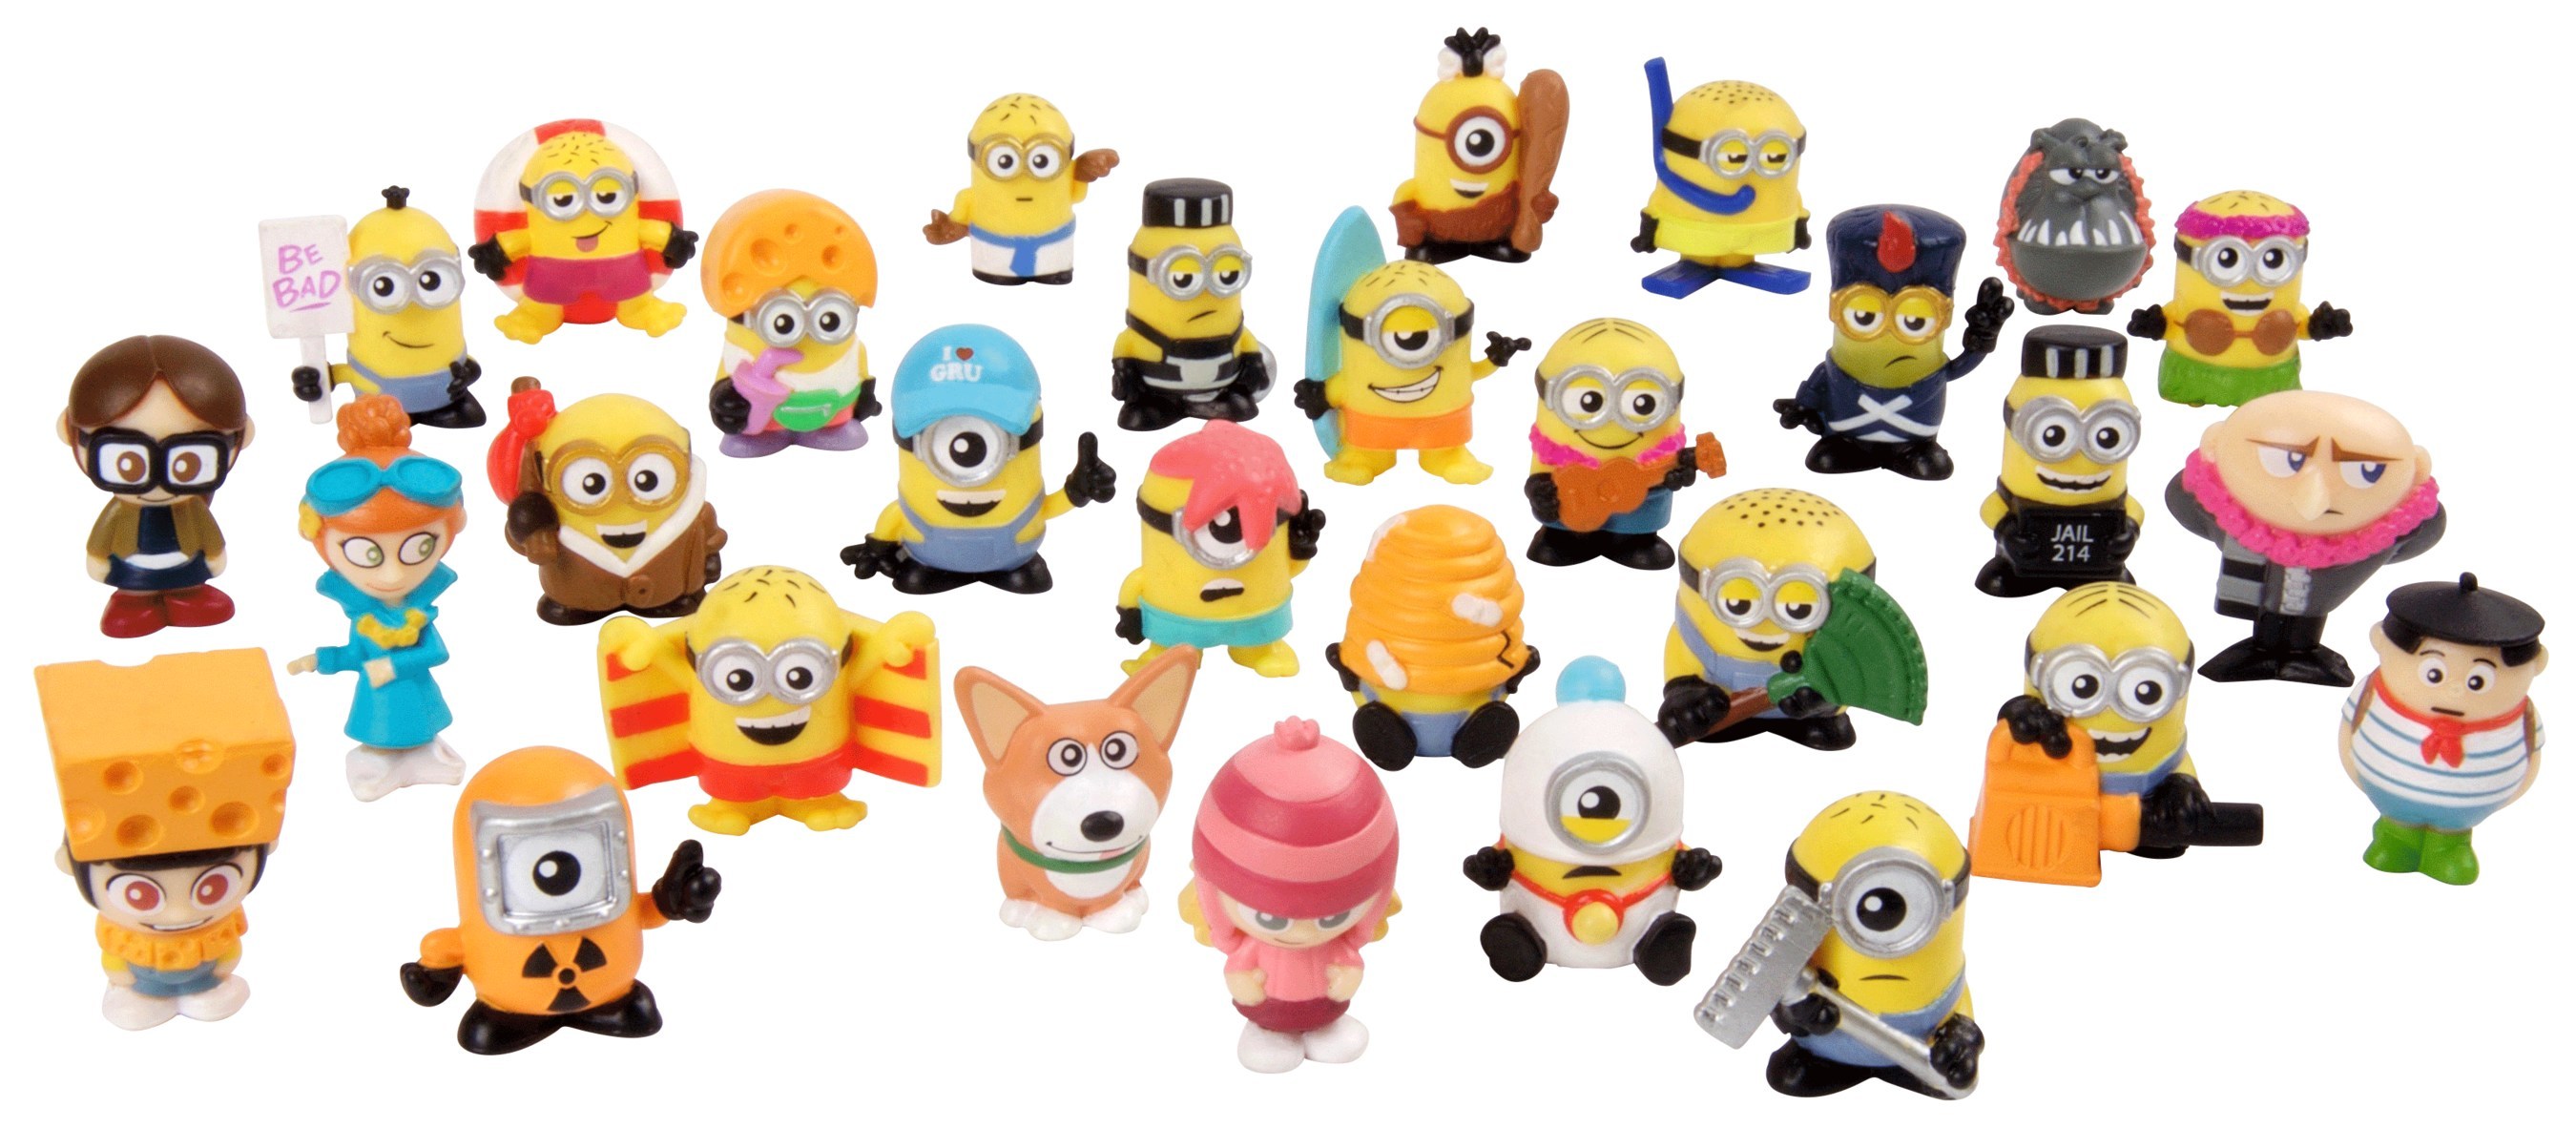 Despicable Me 2 Lesbian Porn - Moose Toys Collaborates With Illumination and Universal Brand Development  to Create Mineez, an All-New Toy Collectible Line Featuring the Largest  Selection of Despicable Me Characters